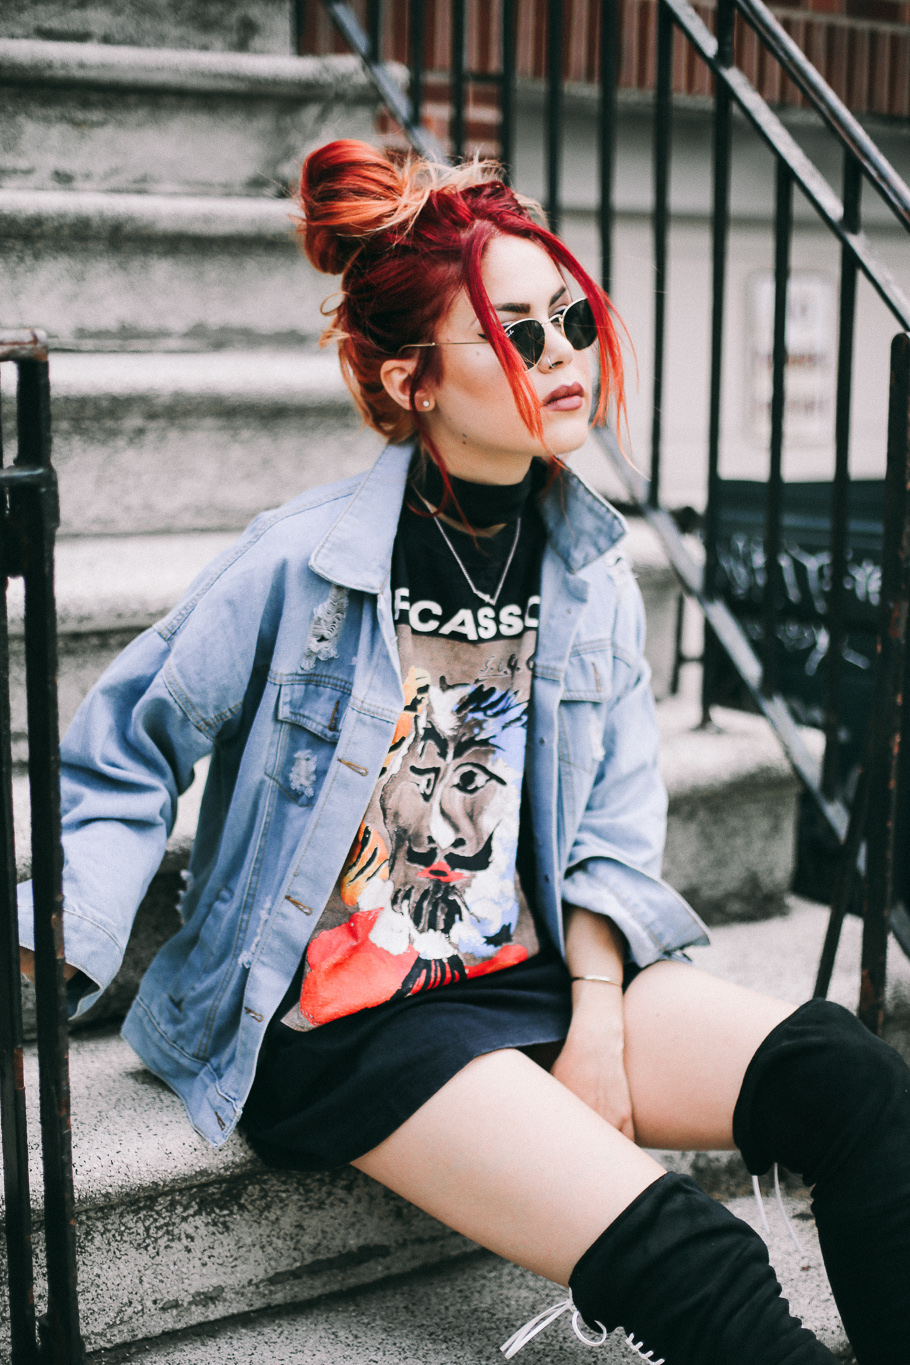 Le Happy wearing McQ thigh high boots and denim jacket